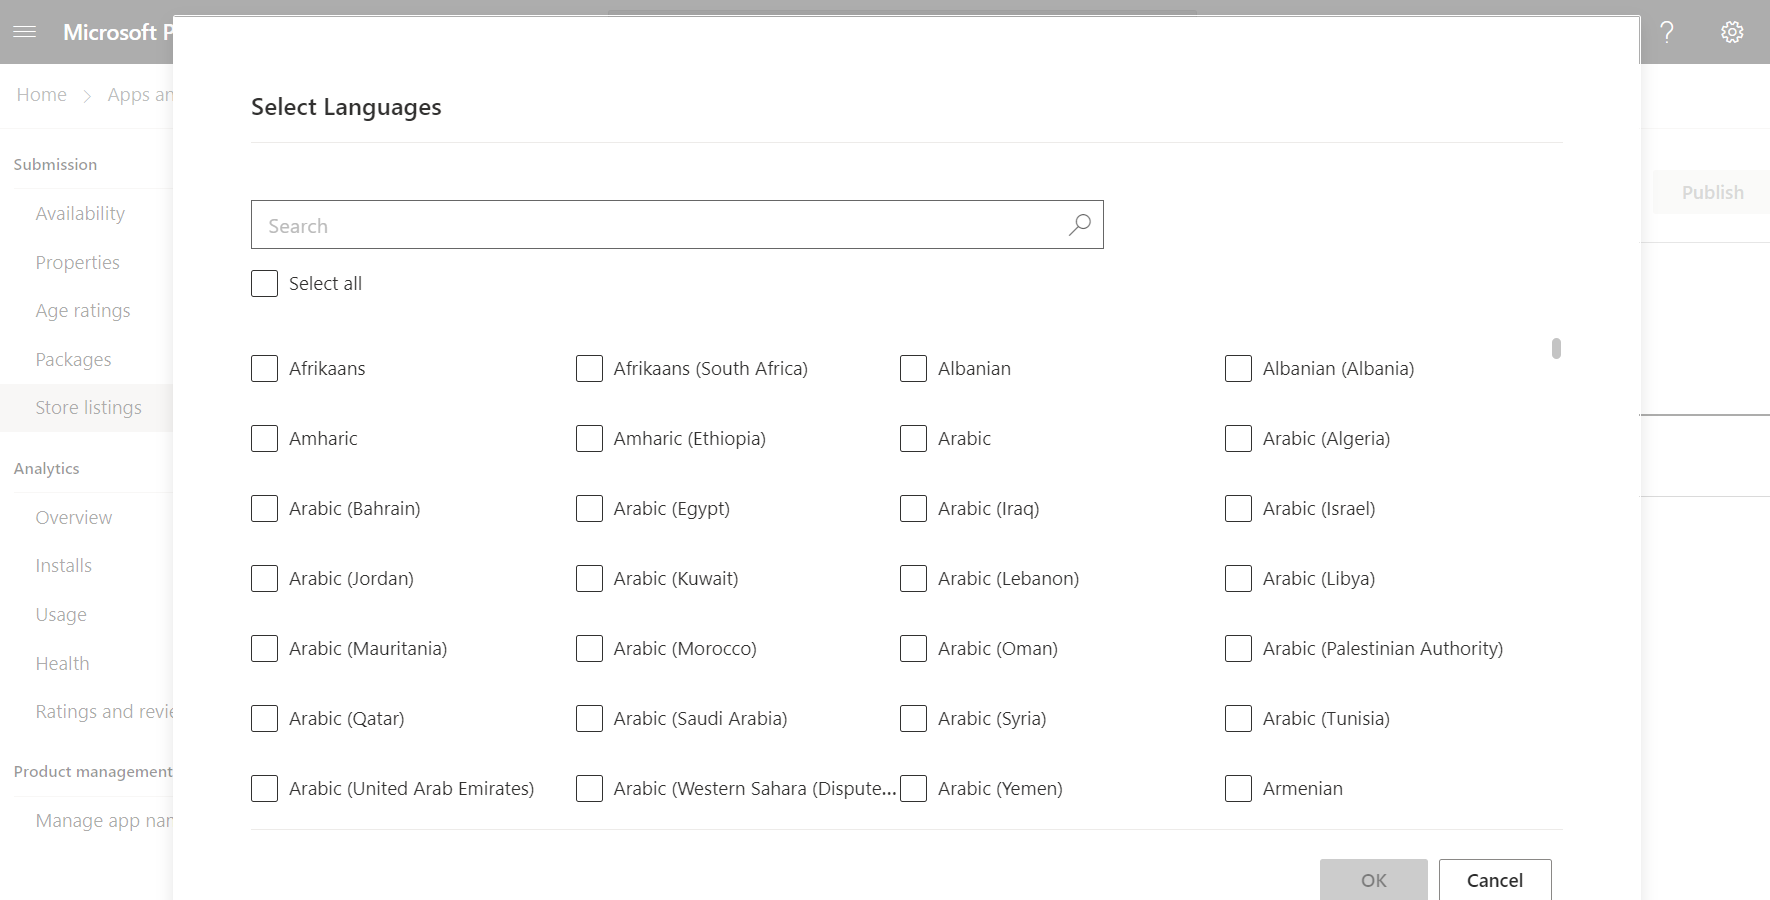 A screenshot of the Store listings section where you can add a language for listing your app in Microsoft Store.